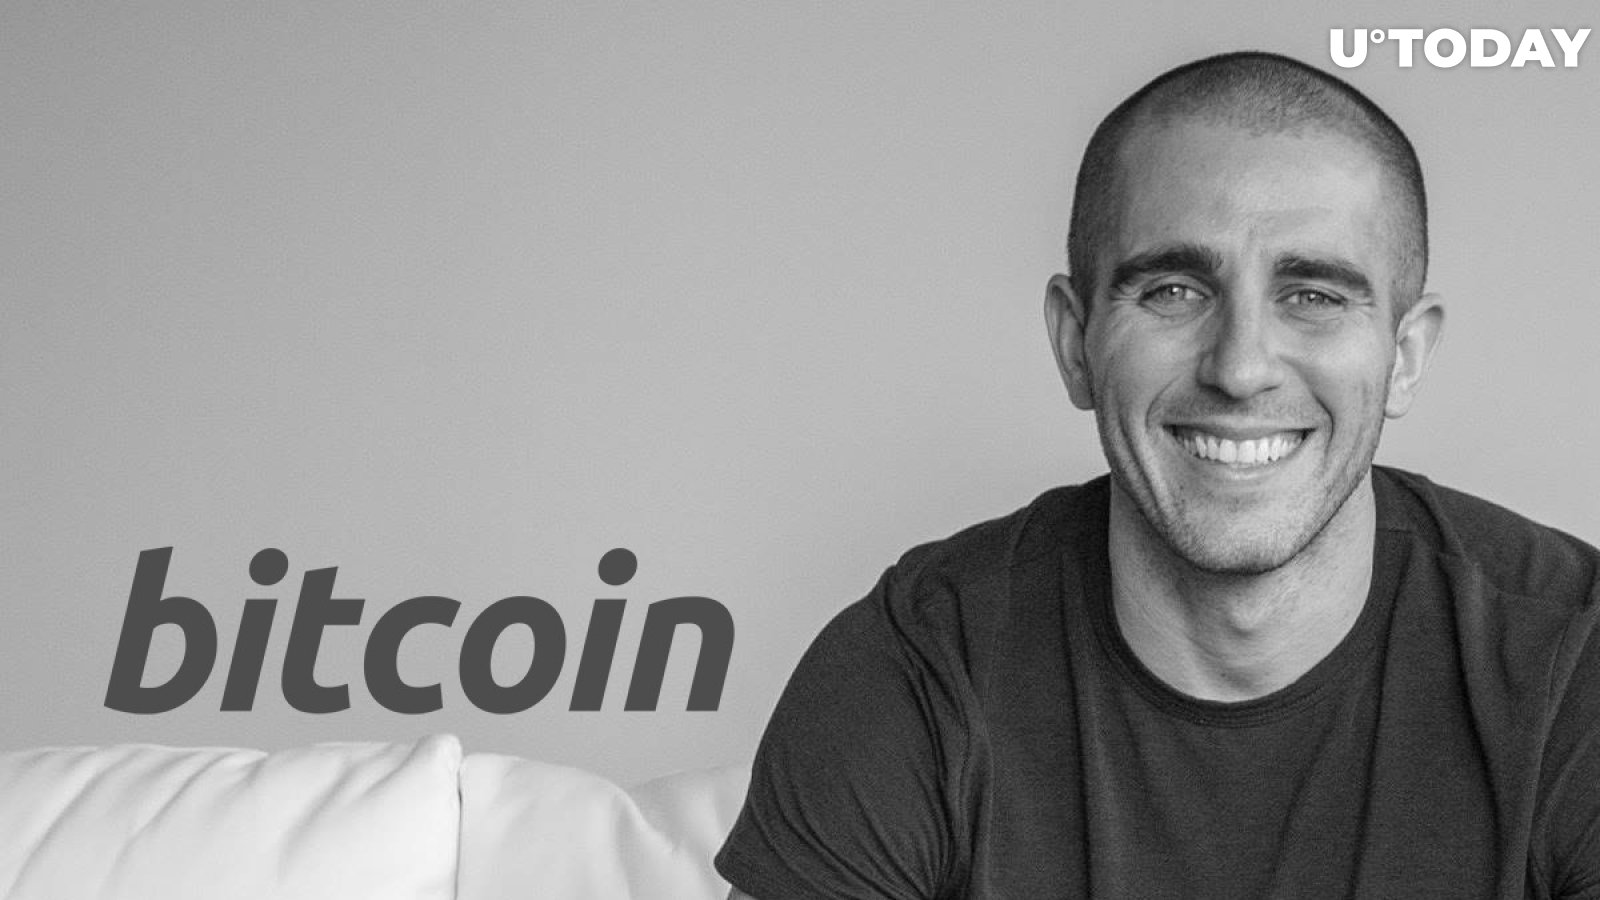 Nothing Better Than Bitcoin: Anthony Pompliano